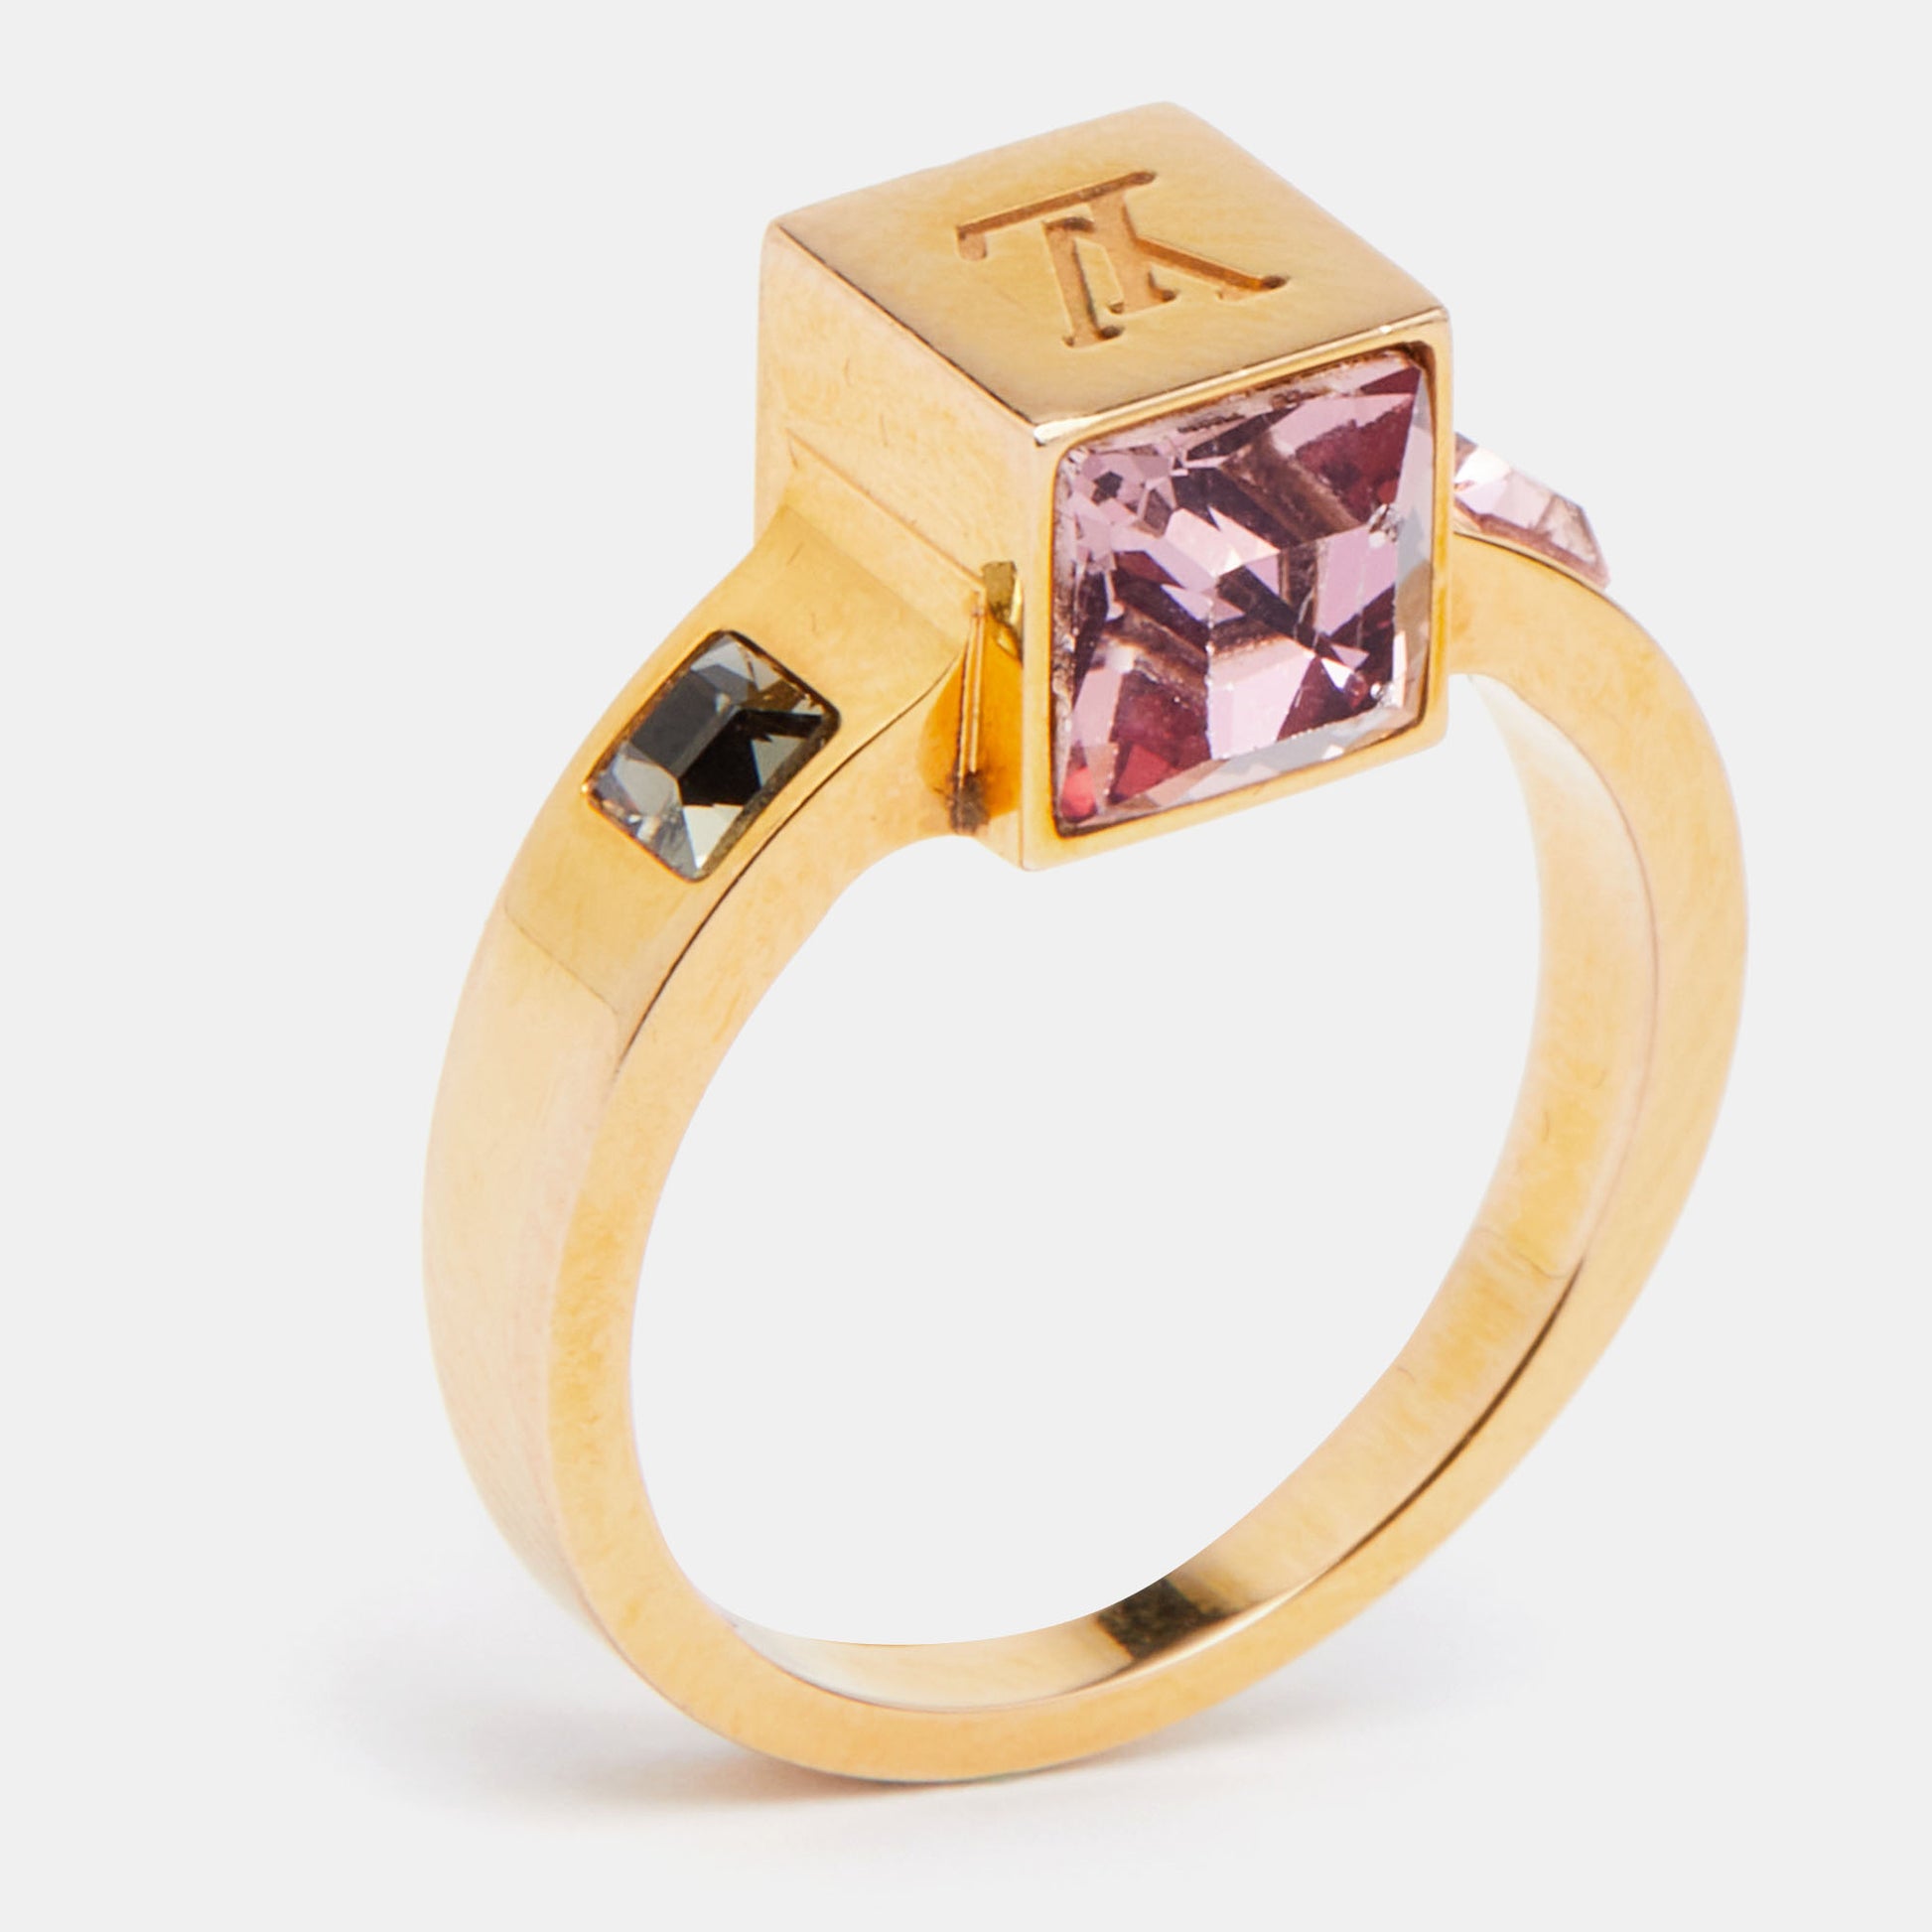 Louis Vuitton Authenticated Crystal Ring